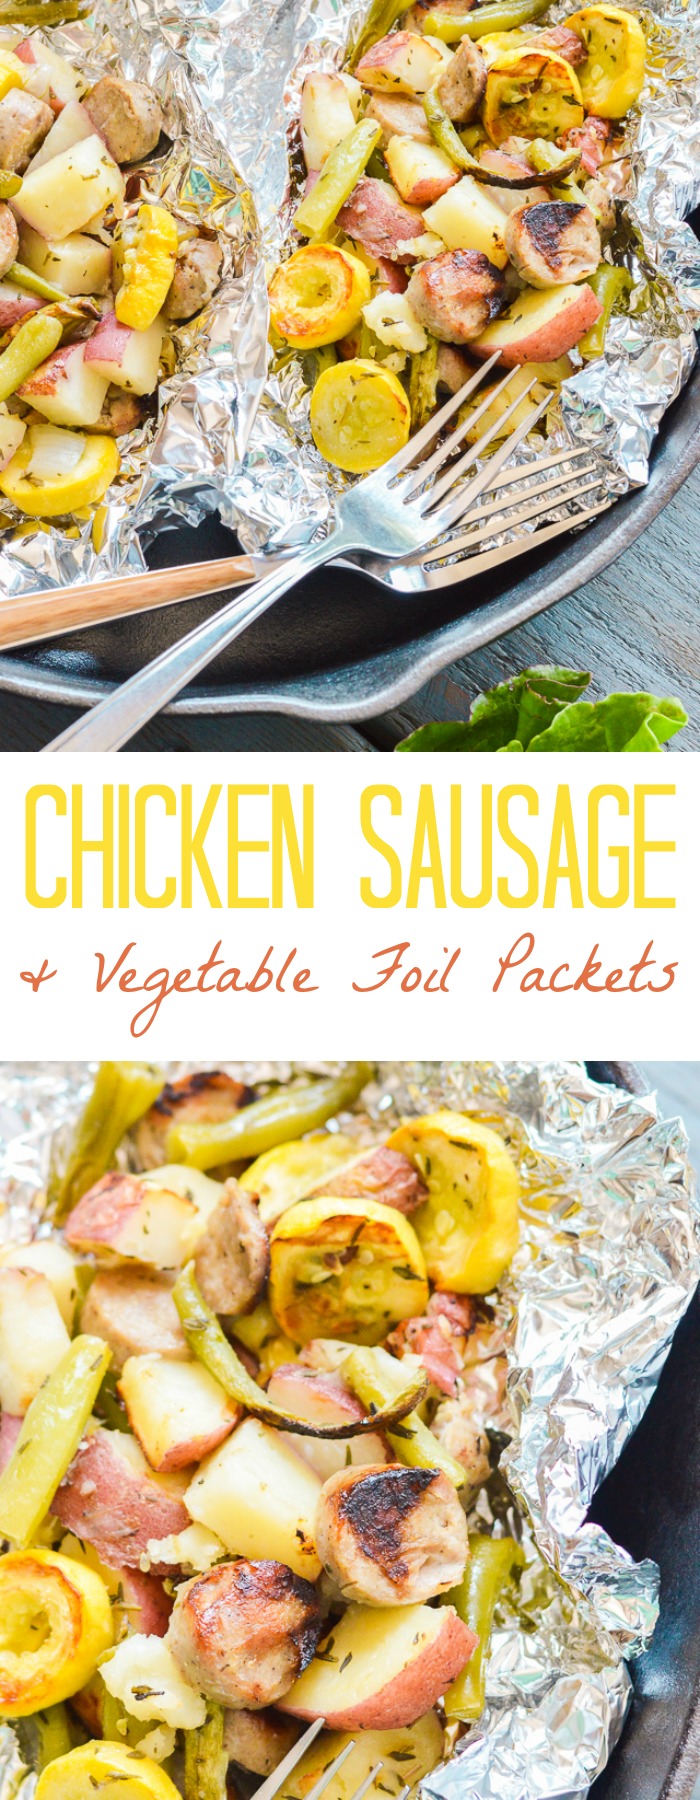 Chicken Sausage and Vegetable Foil Packets are perfect for the grill. They're Paleo, gluten-free, dairy-free, healthy, and easy!